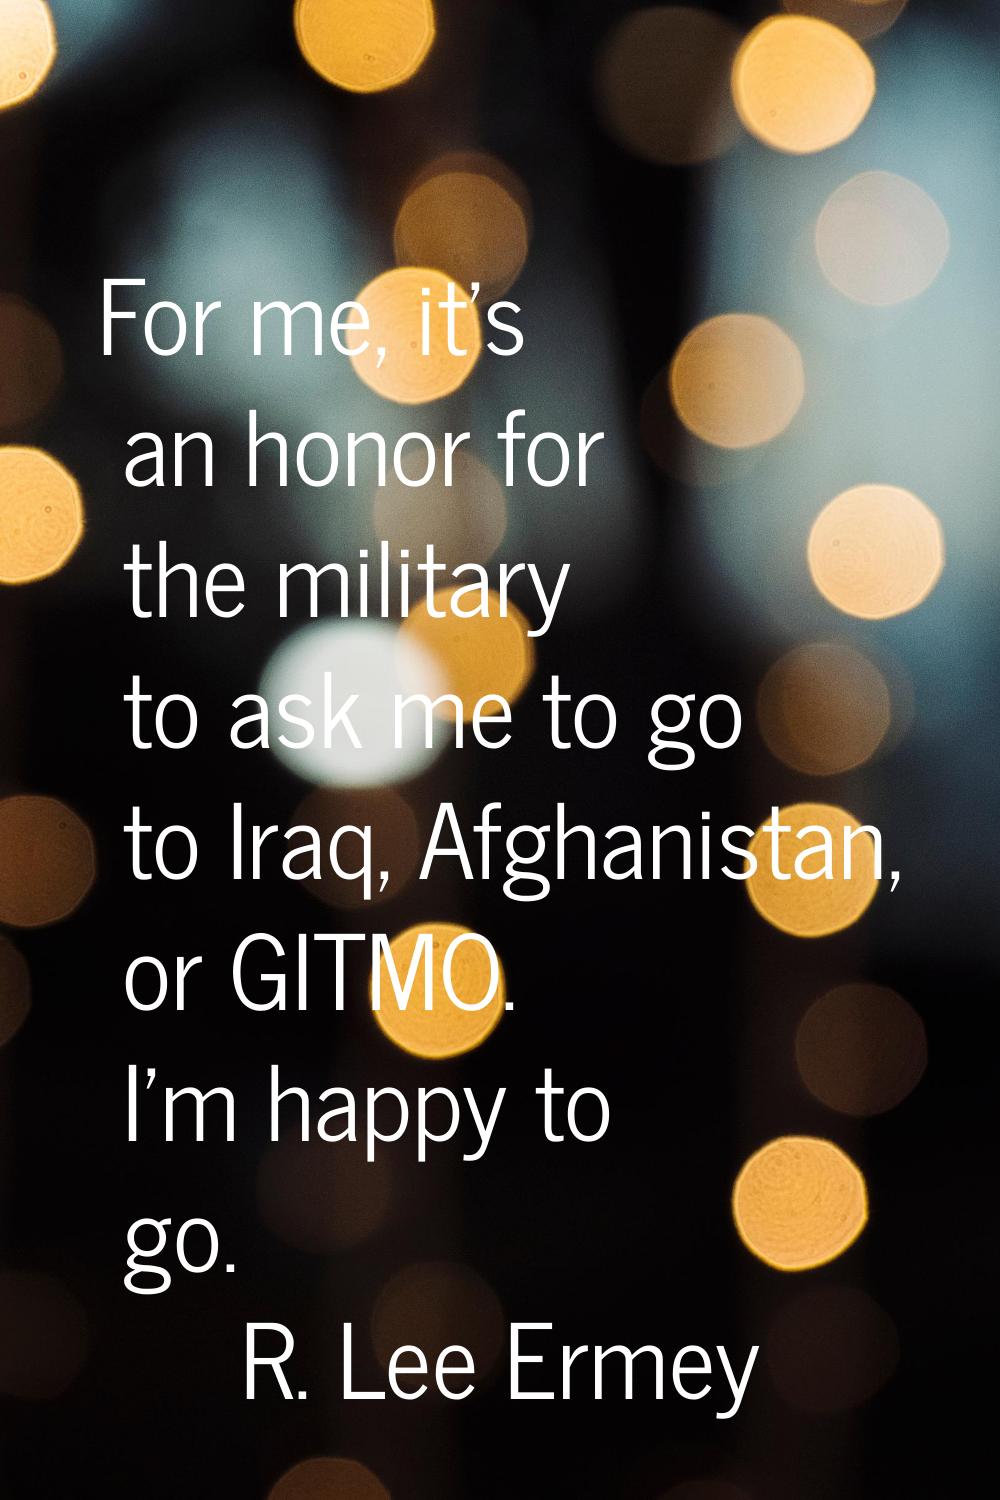 For me, it's an honor for the military to ask me to go to Iraq, Afghanistan, or GITMO. I'm happy to